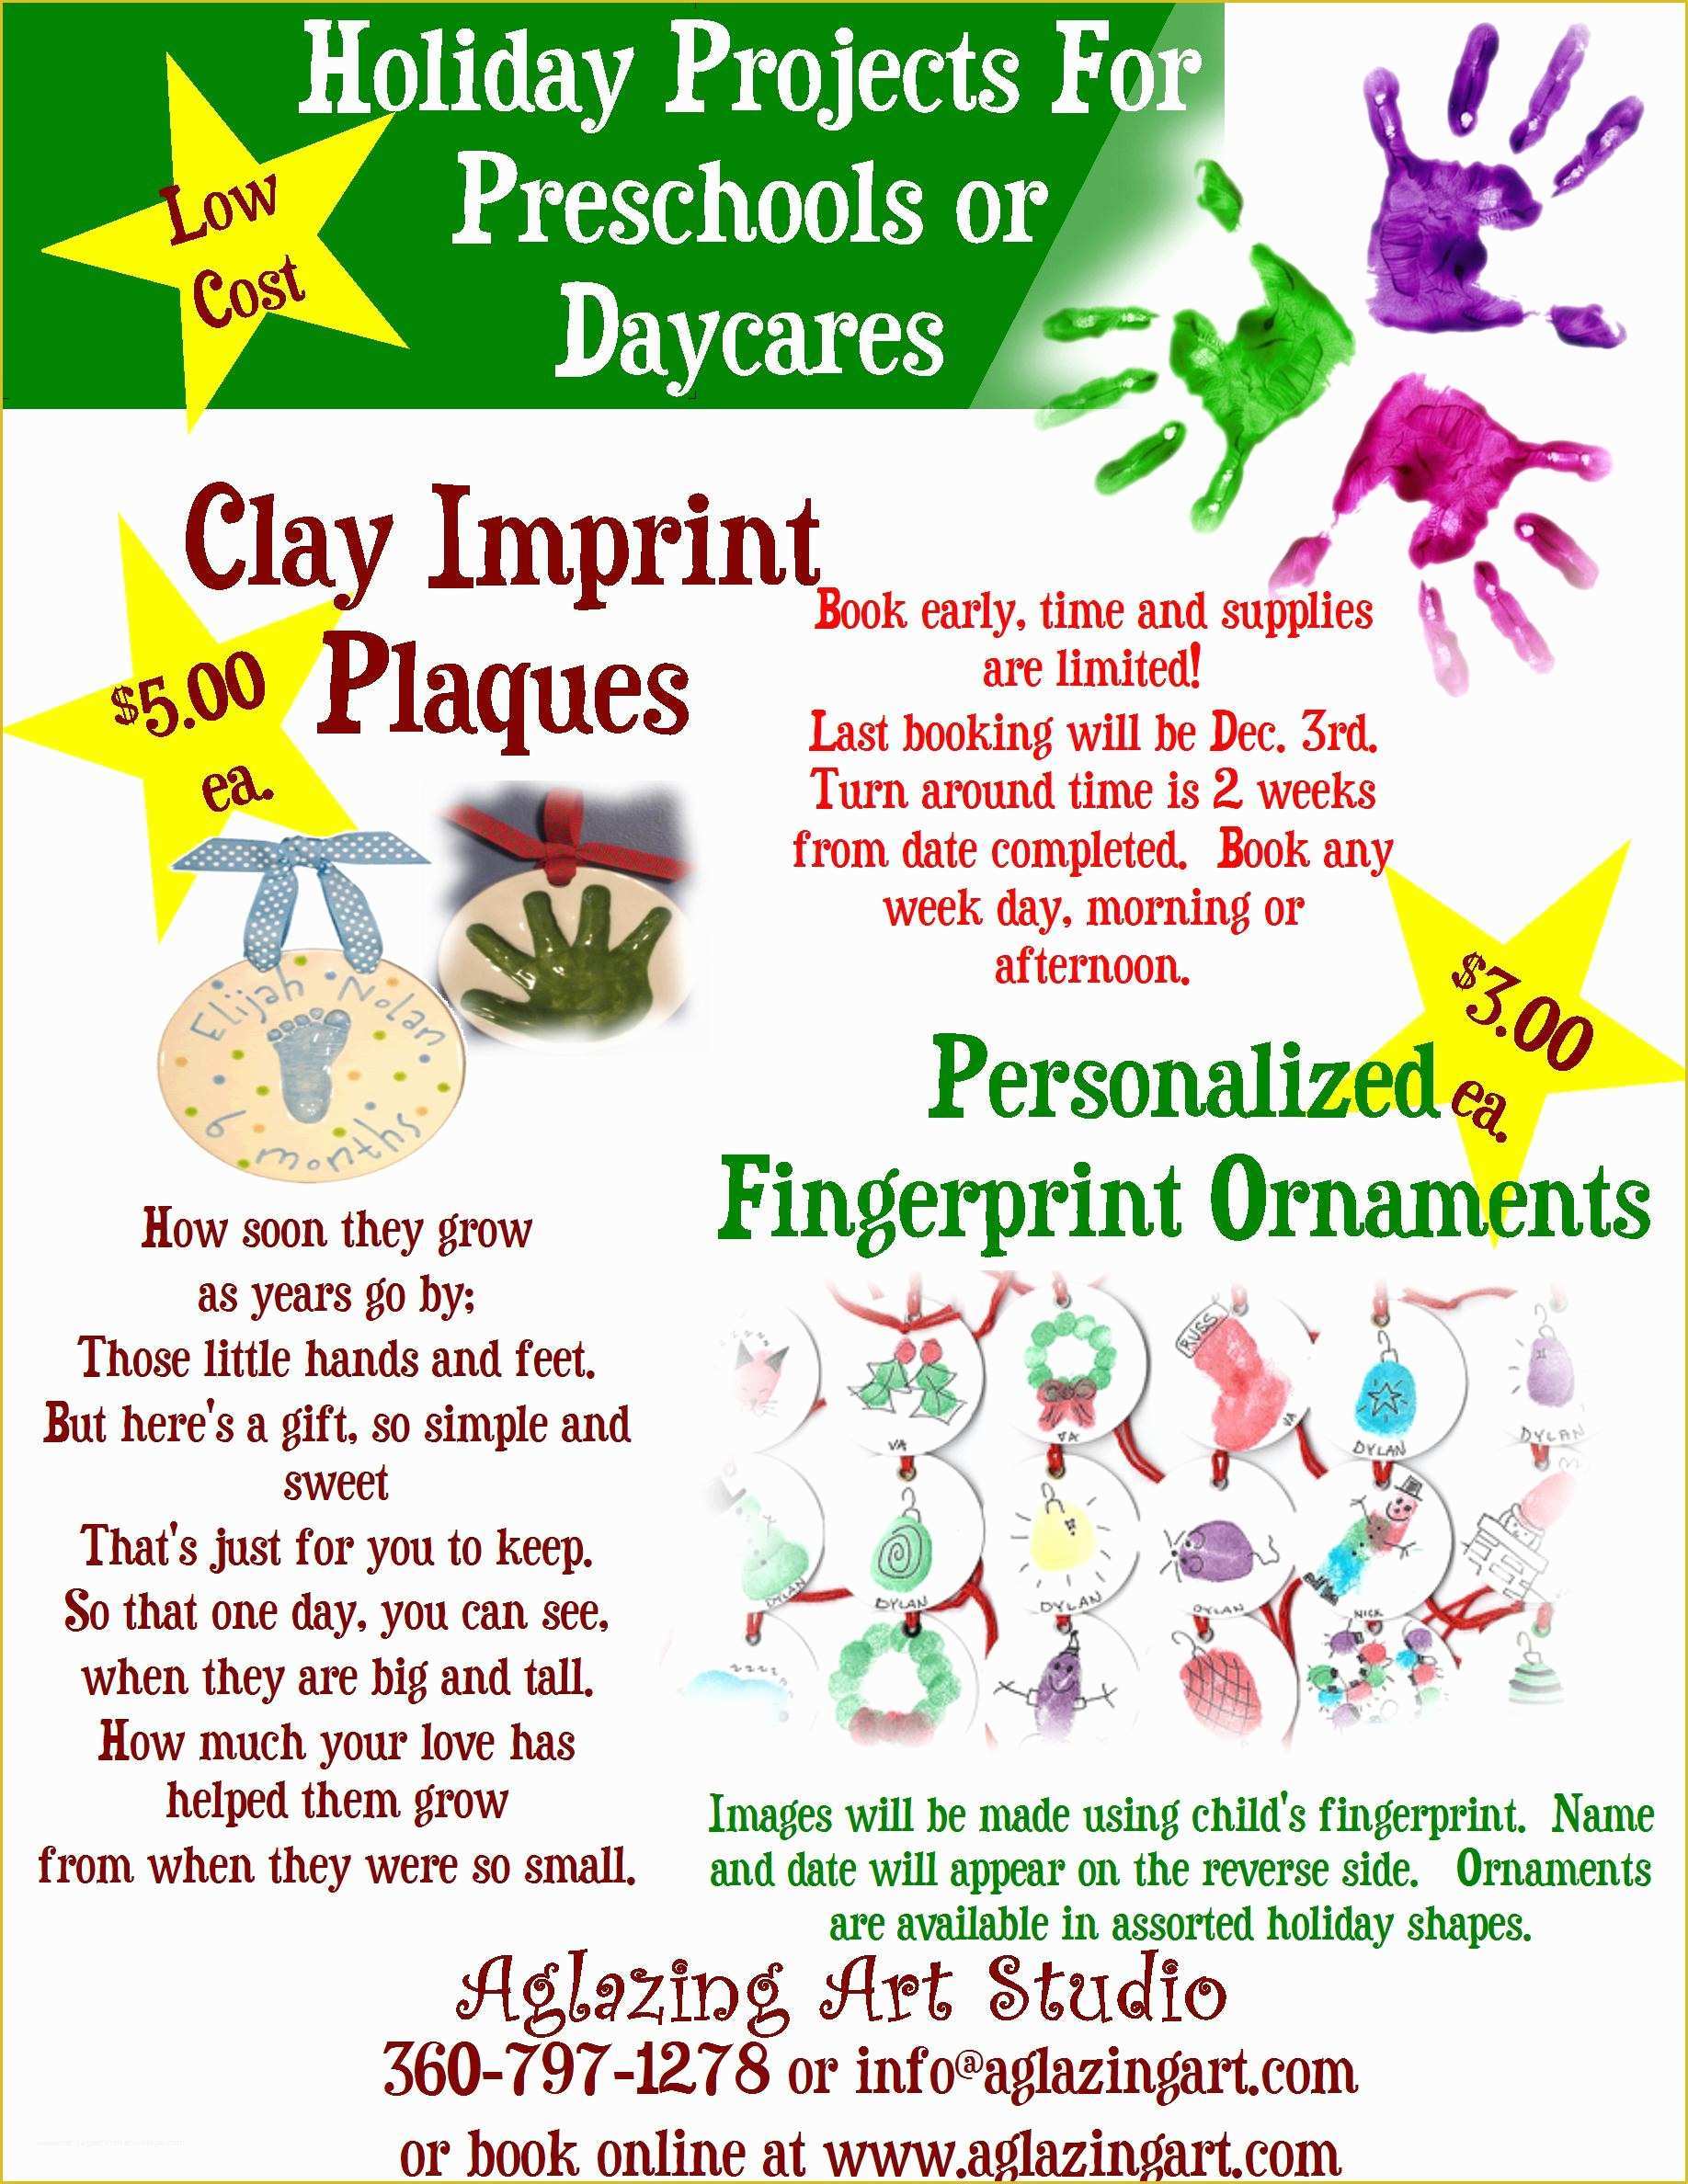 Business Flyer Templates Free Printable Of Daycare Flyers Printables 569a367b0c50 Idealmedia